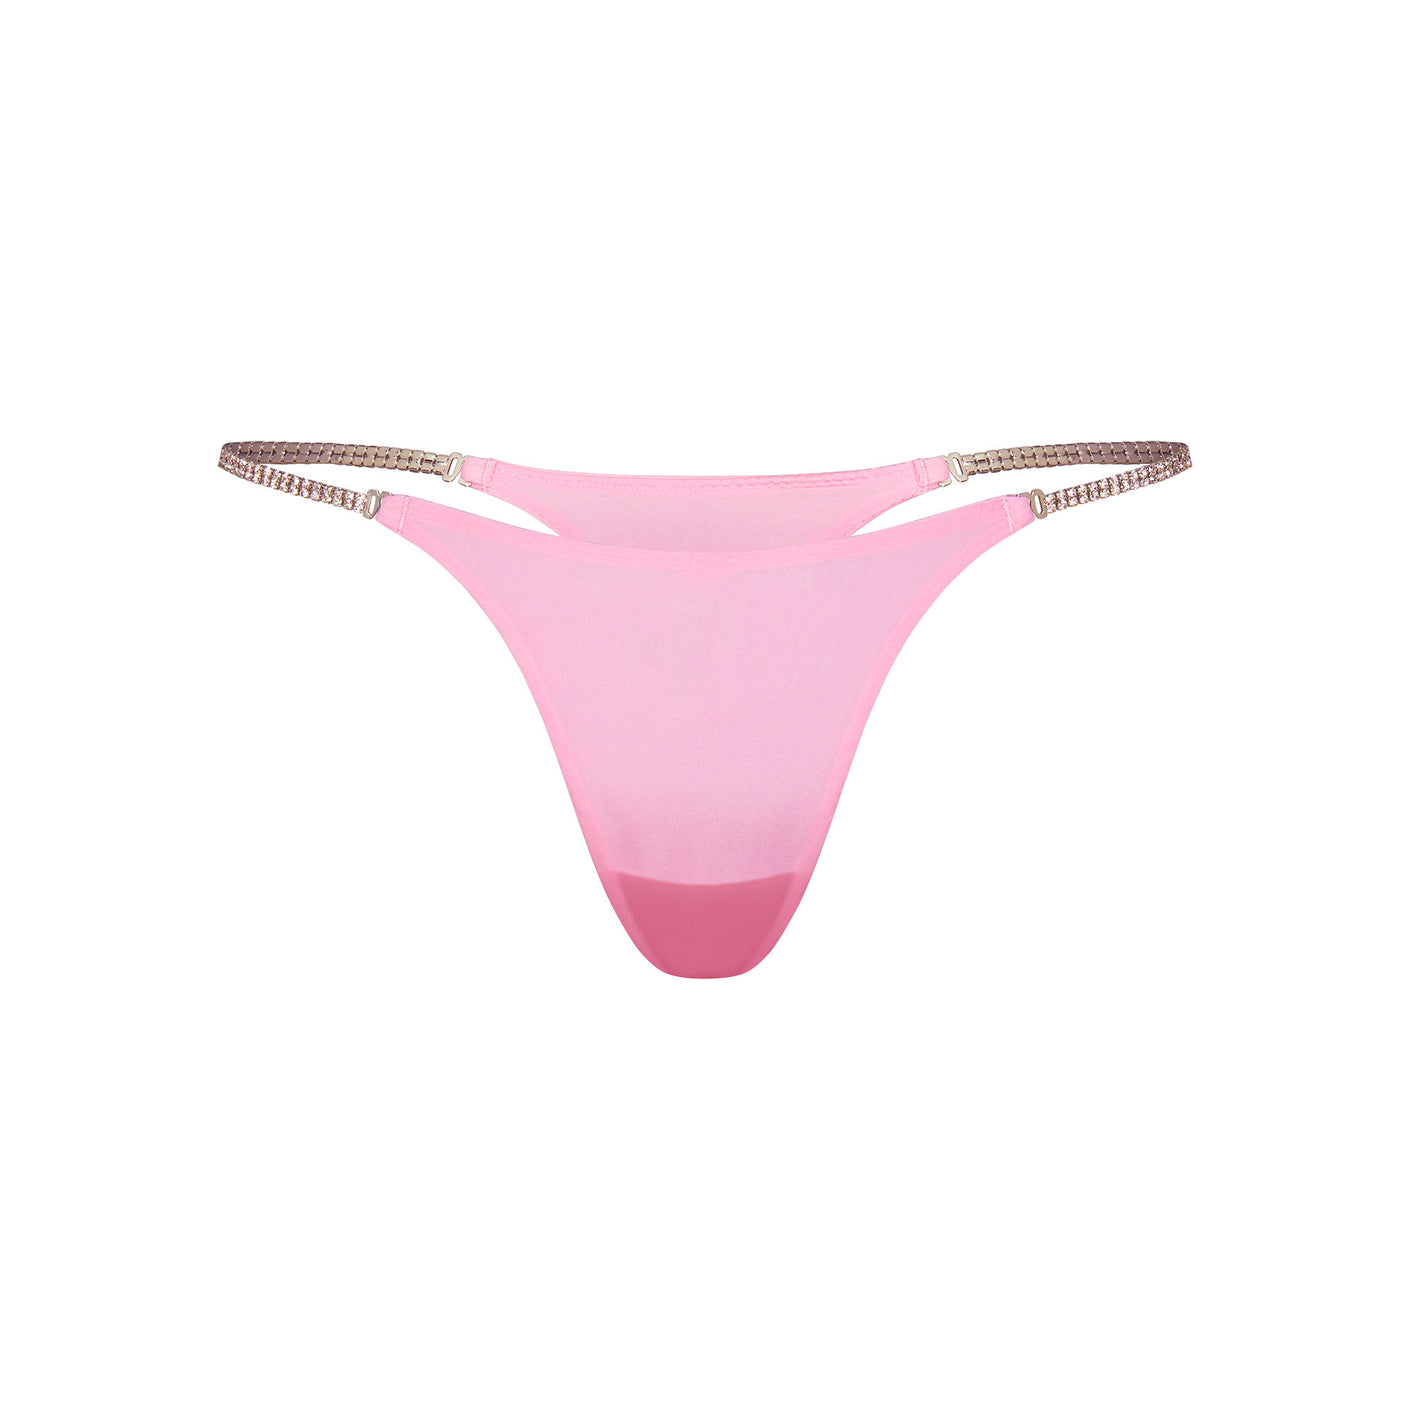 Mens Smooth/Flat Front, G-String thong with side ties in gold